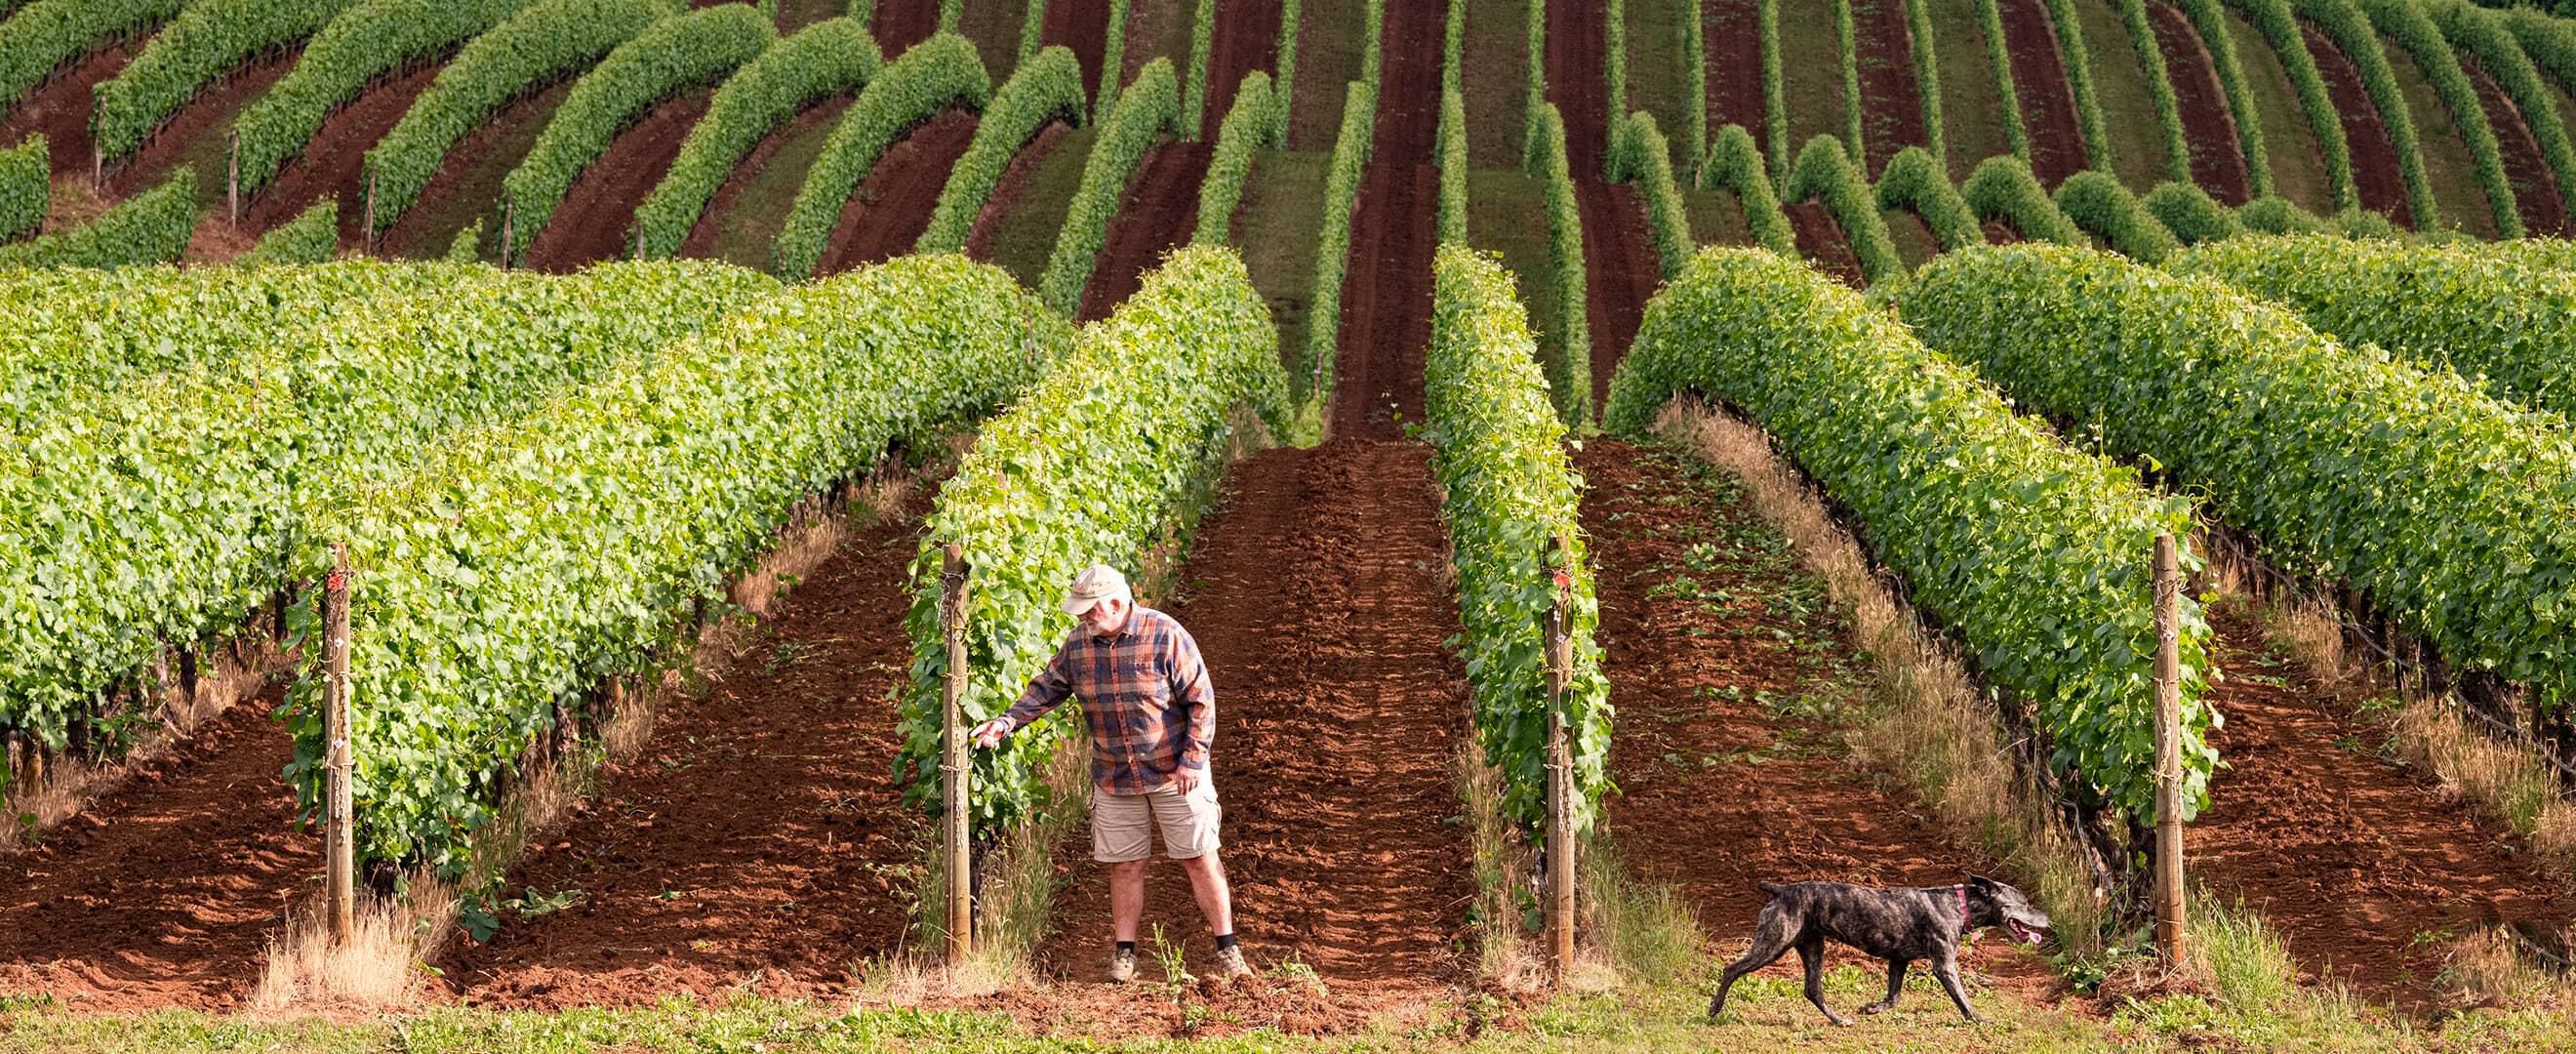 A person and their dog in Bell aVida Vineyards